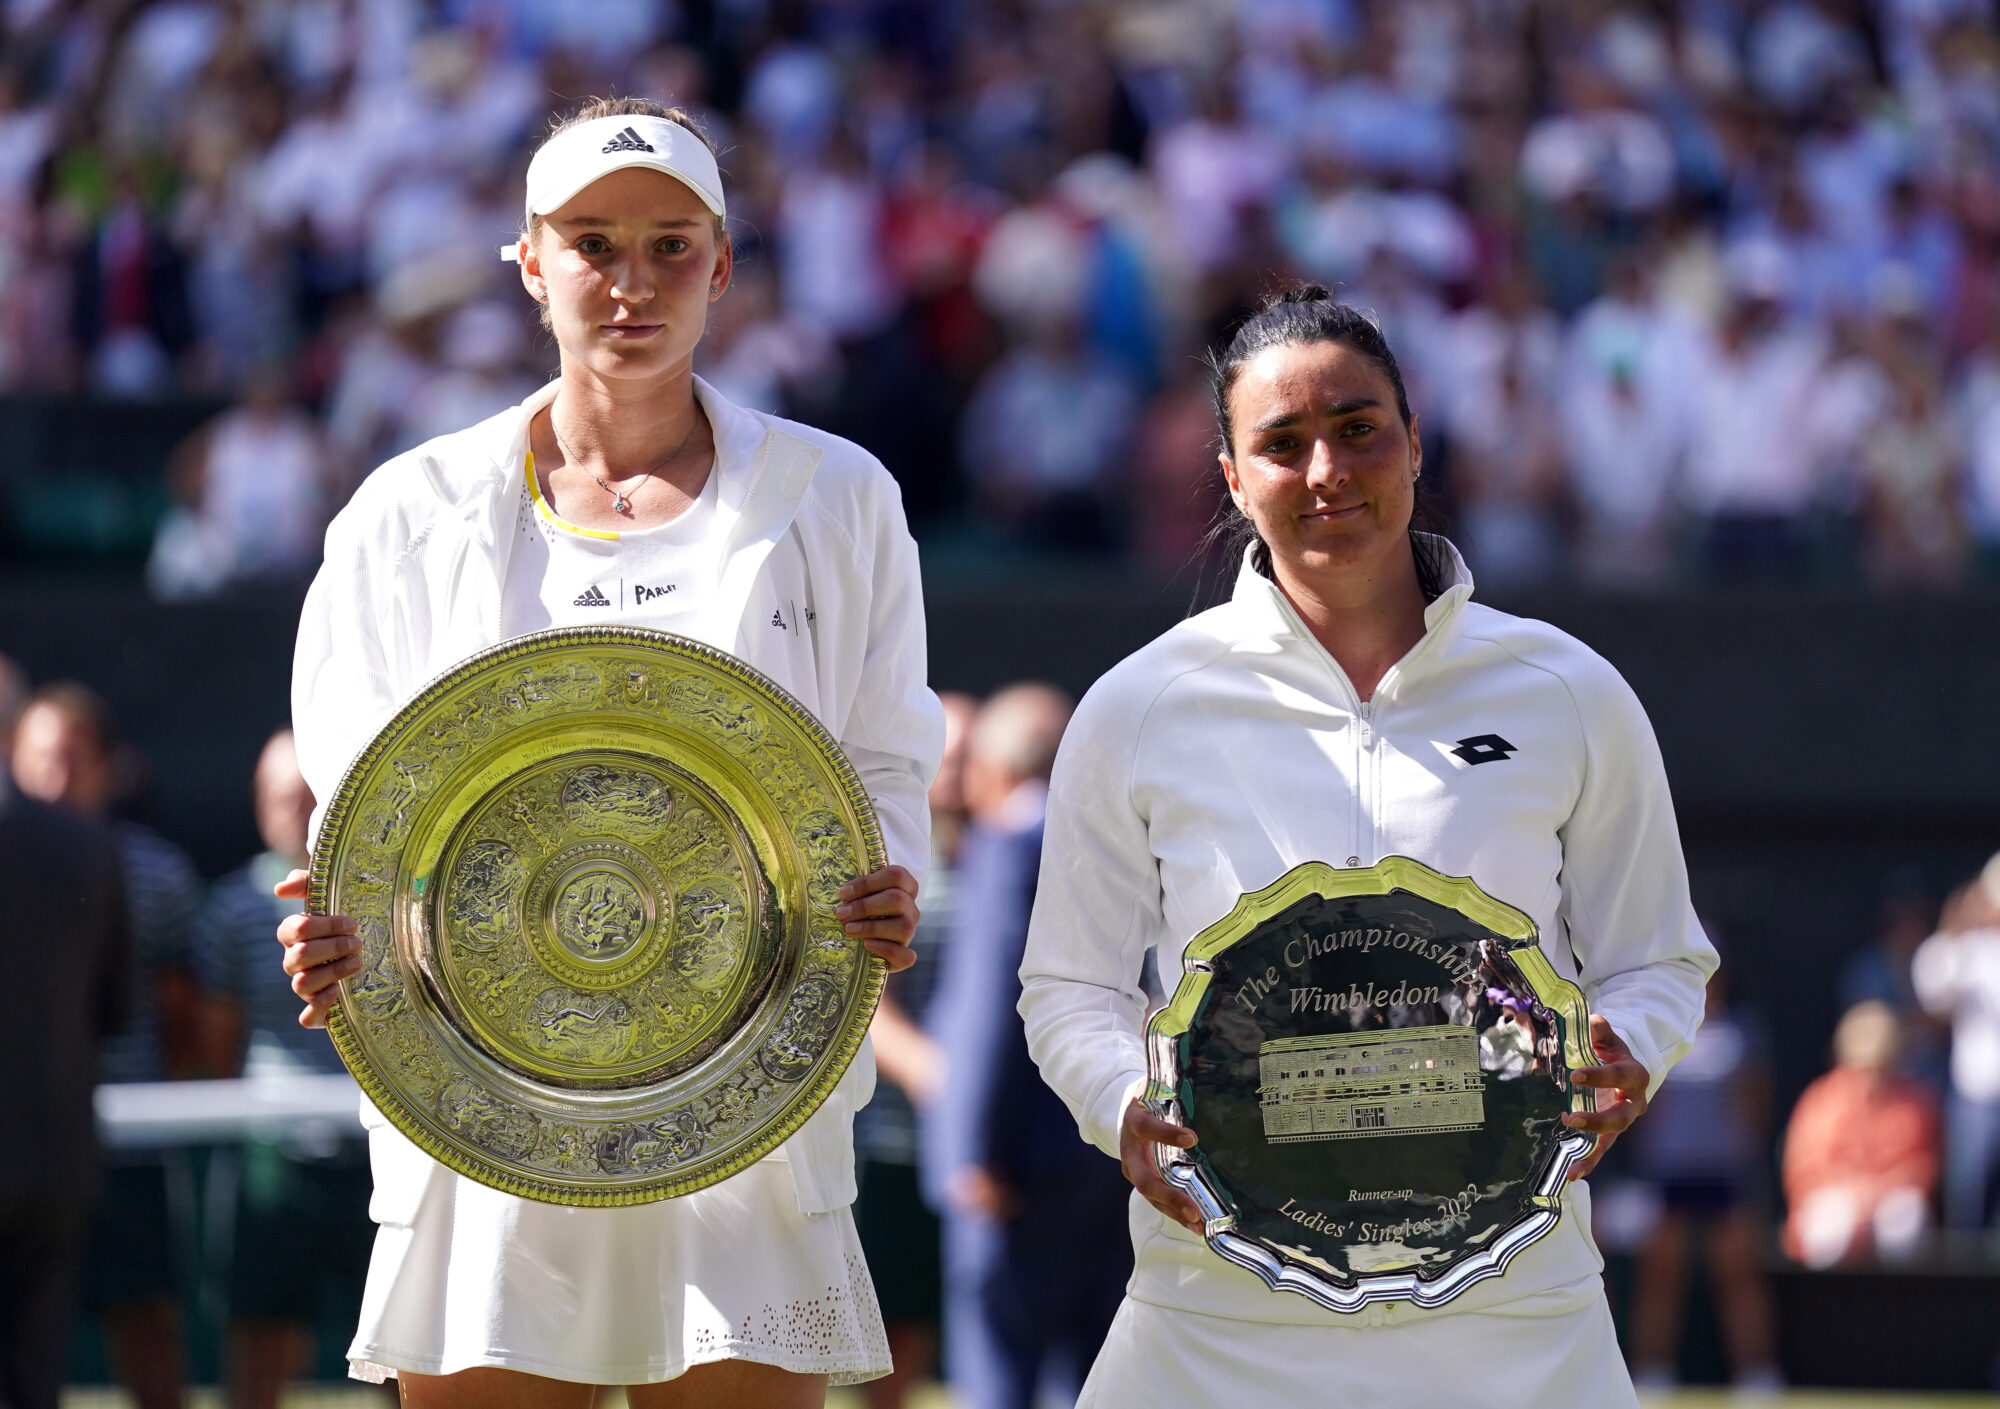 Elena Rybakina (left) with the The Venus Rosewater Dish after defeating Ons Jabeur in The Final of the Ladies' Singles on day thirteen of the 2022 Wimbledon Championships at the All England Lawn Tennis and Croquet Club, Wimbledon. Picture date: Saturday July 9, 2022.